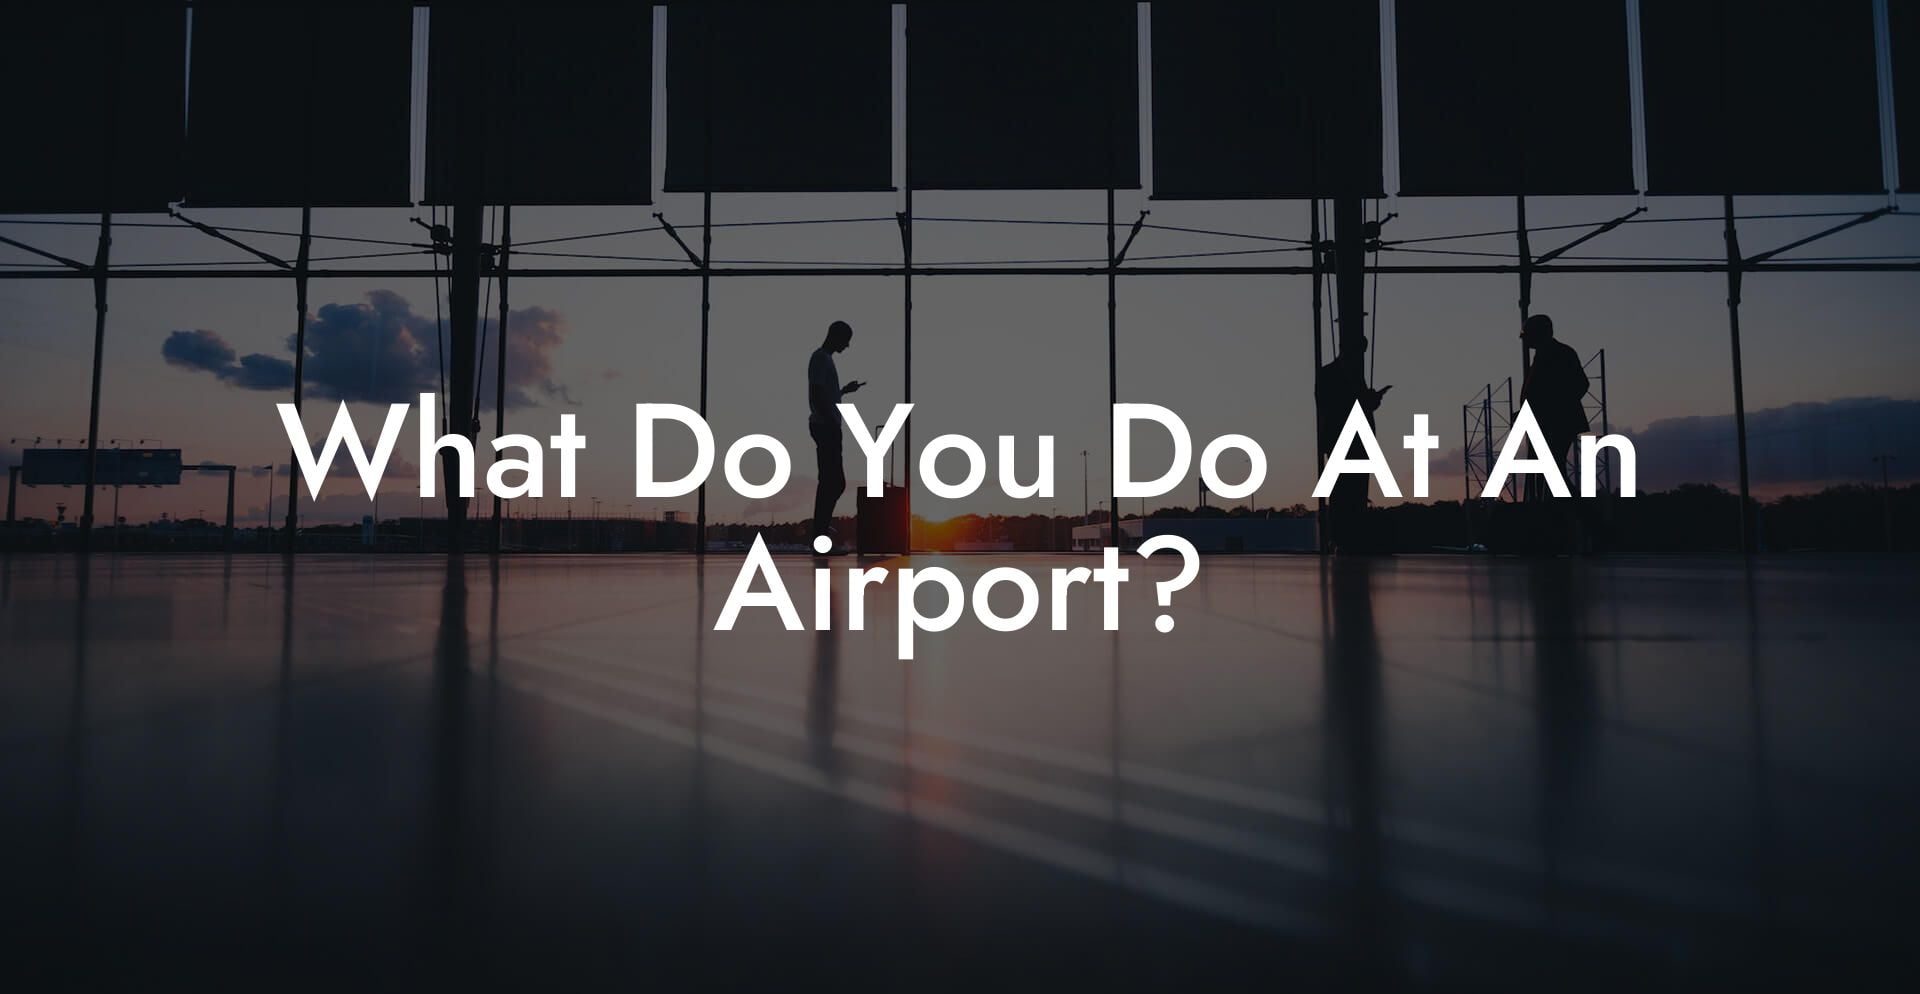 What Do You Do At An Airport?